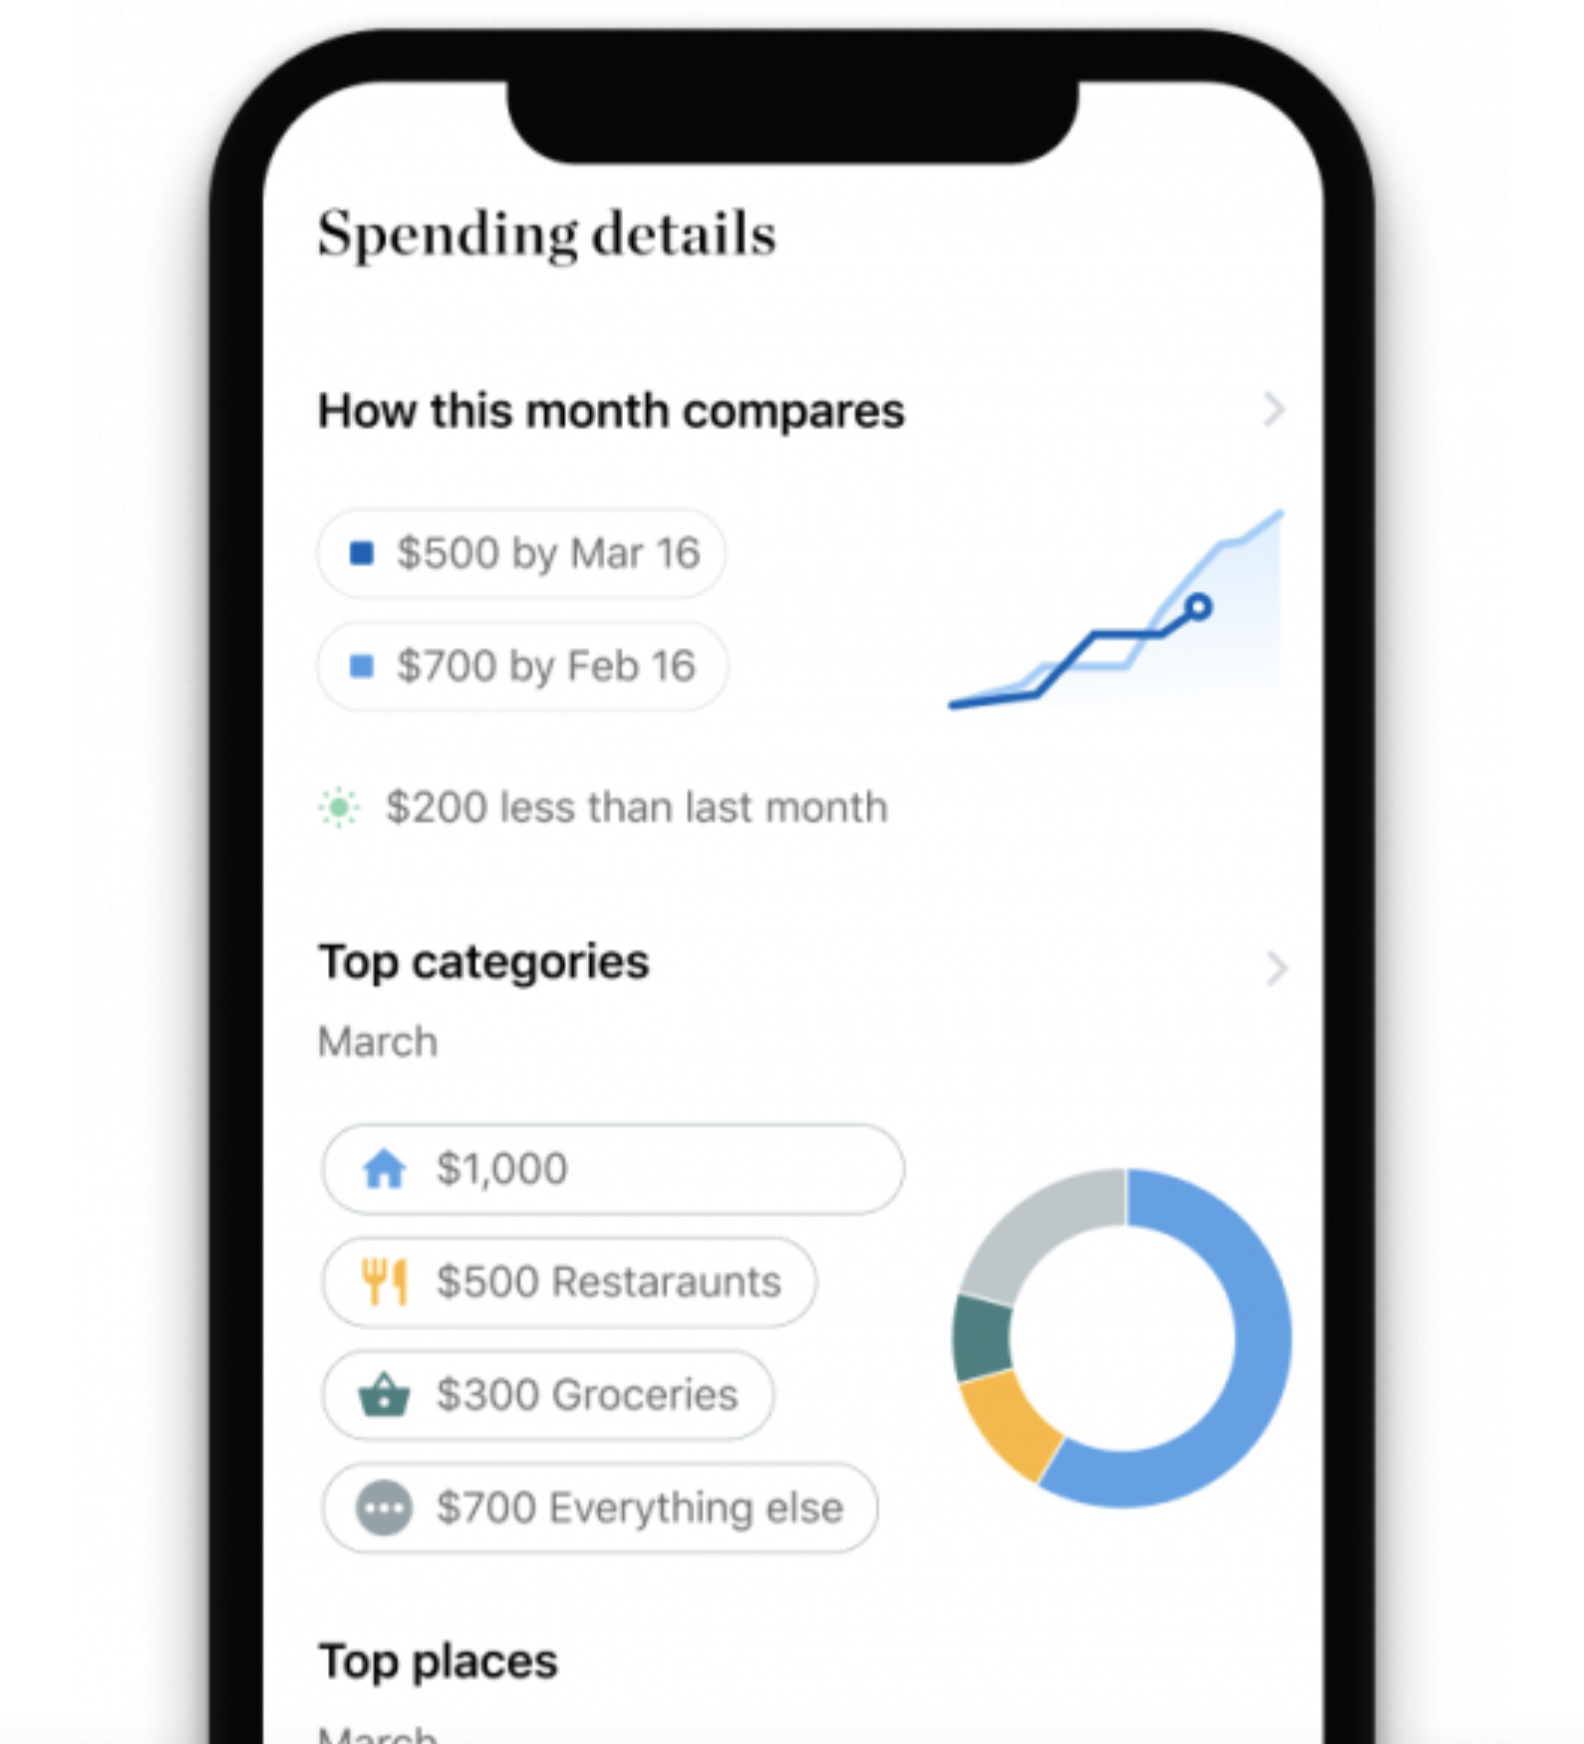 phone screen with spending details and charts